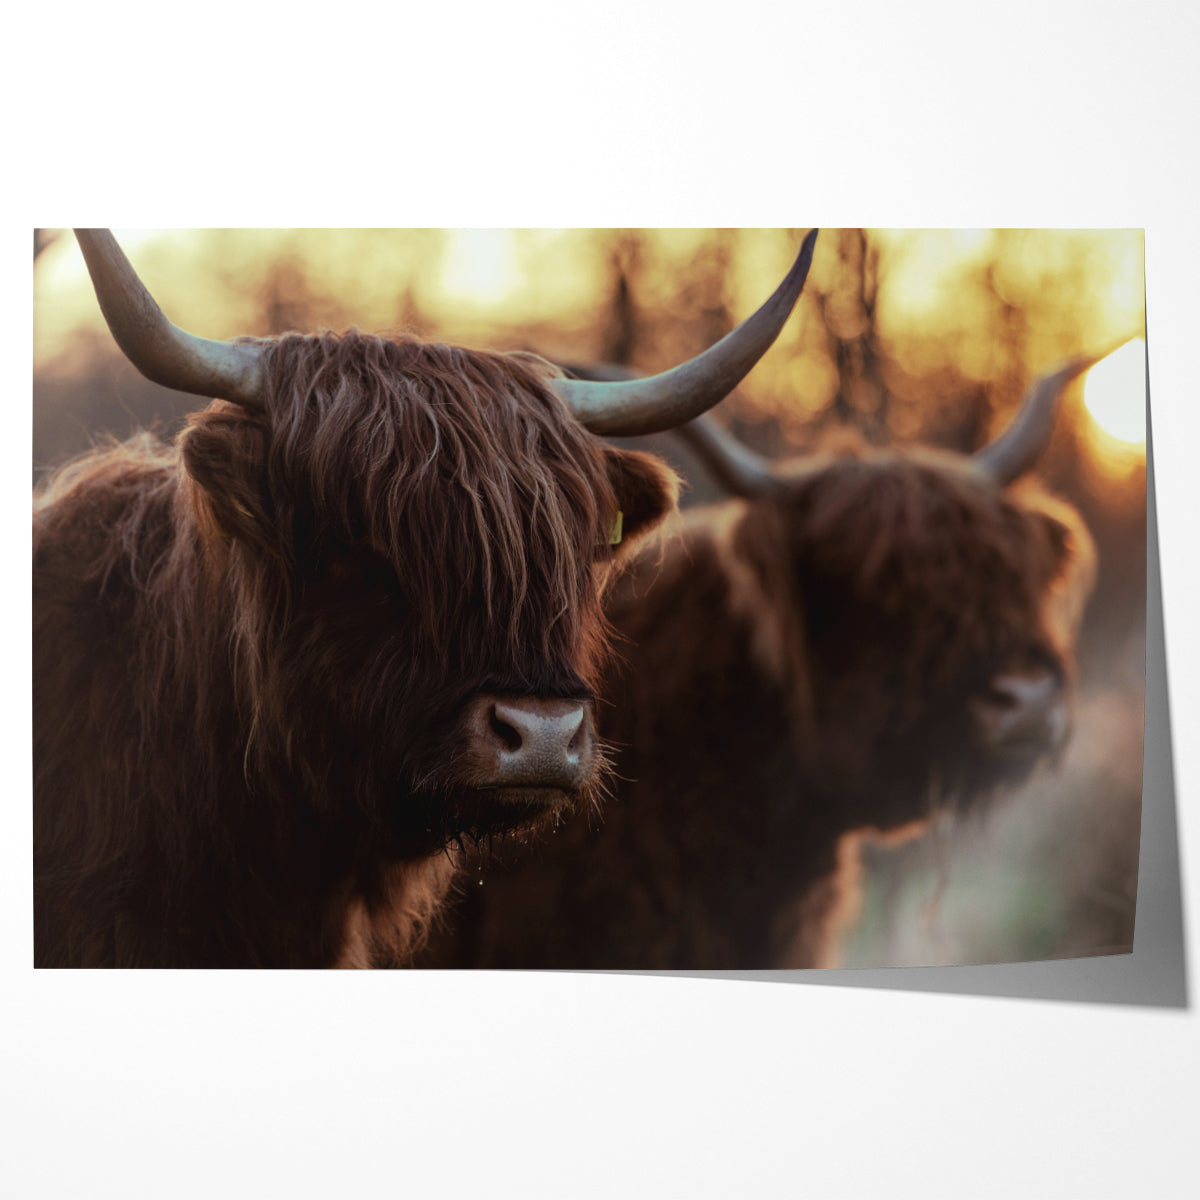 Highland Cows Posters And Wall Art Prints For Living Room-Horizontal Posters NOT FRAMED-CetArt-10″x8″ inches-CetArt